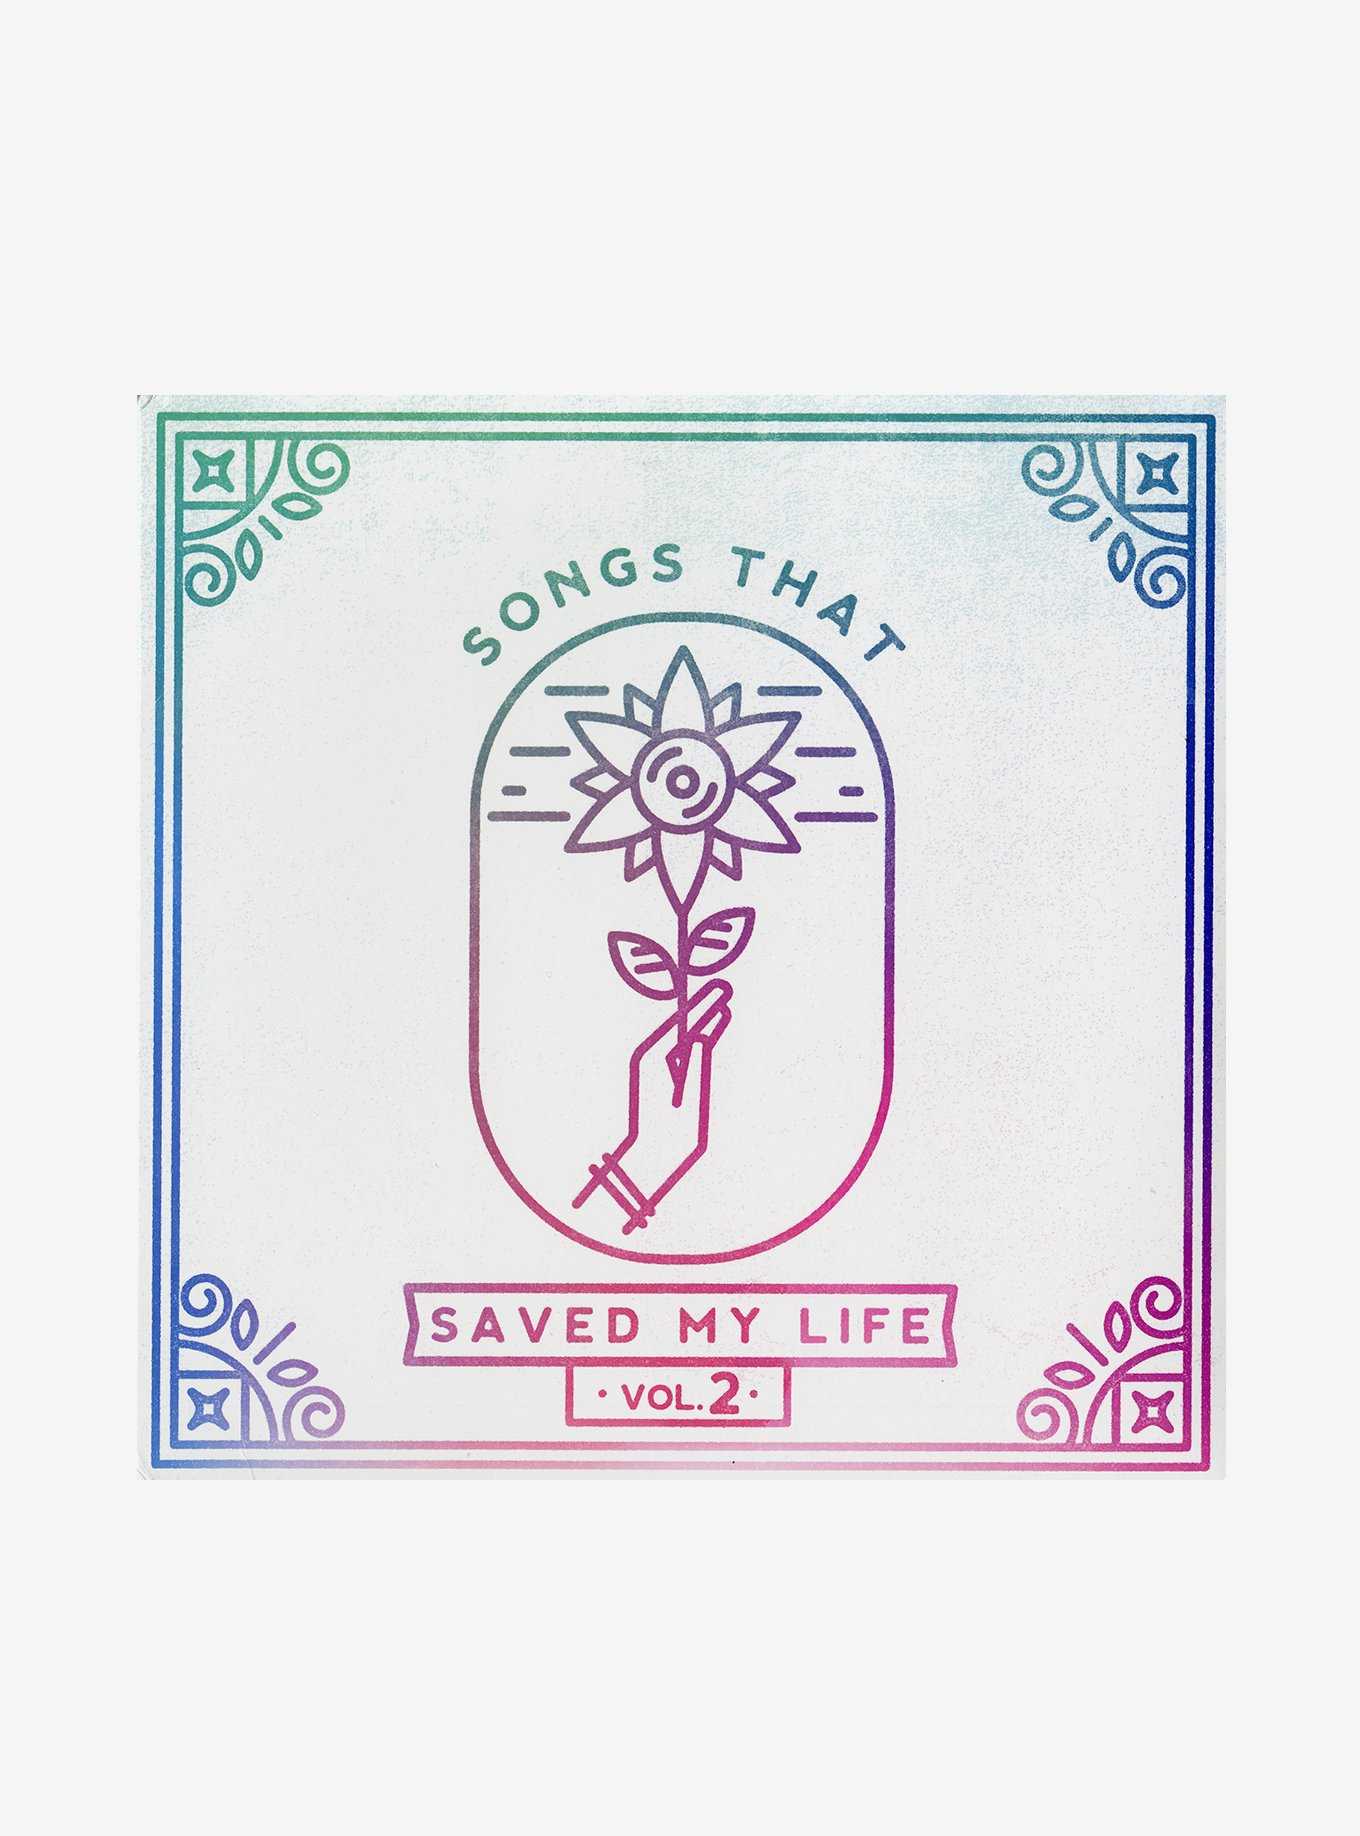 Songs That Saved My Life Vol. 2 LP Vinyl Hot Topic Exclusive Variant, , hi-res